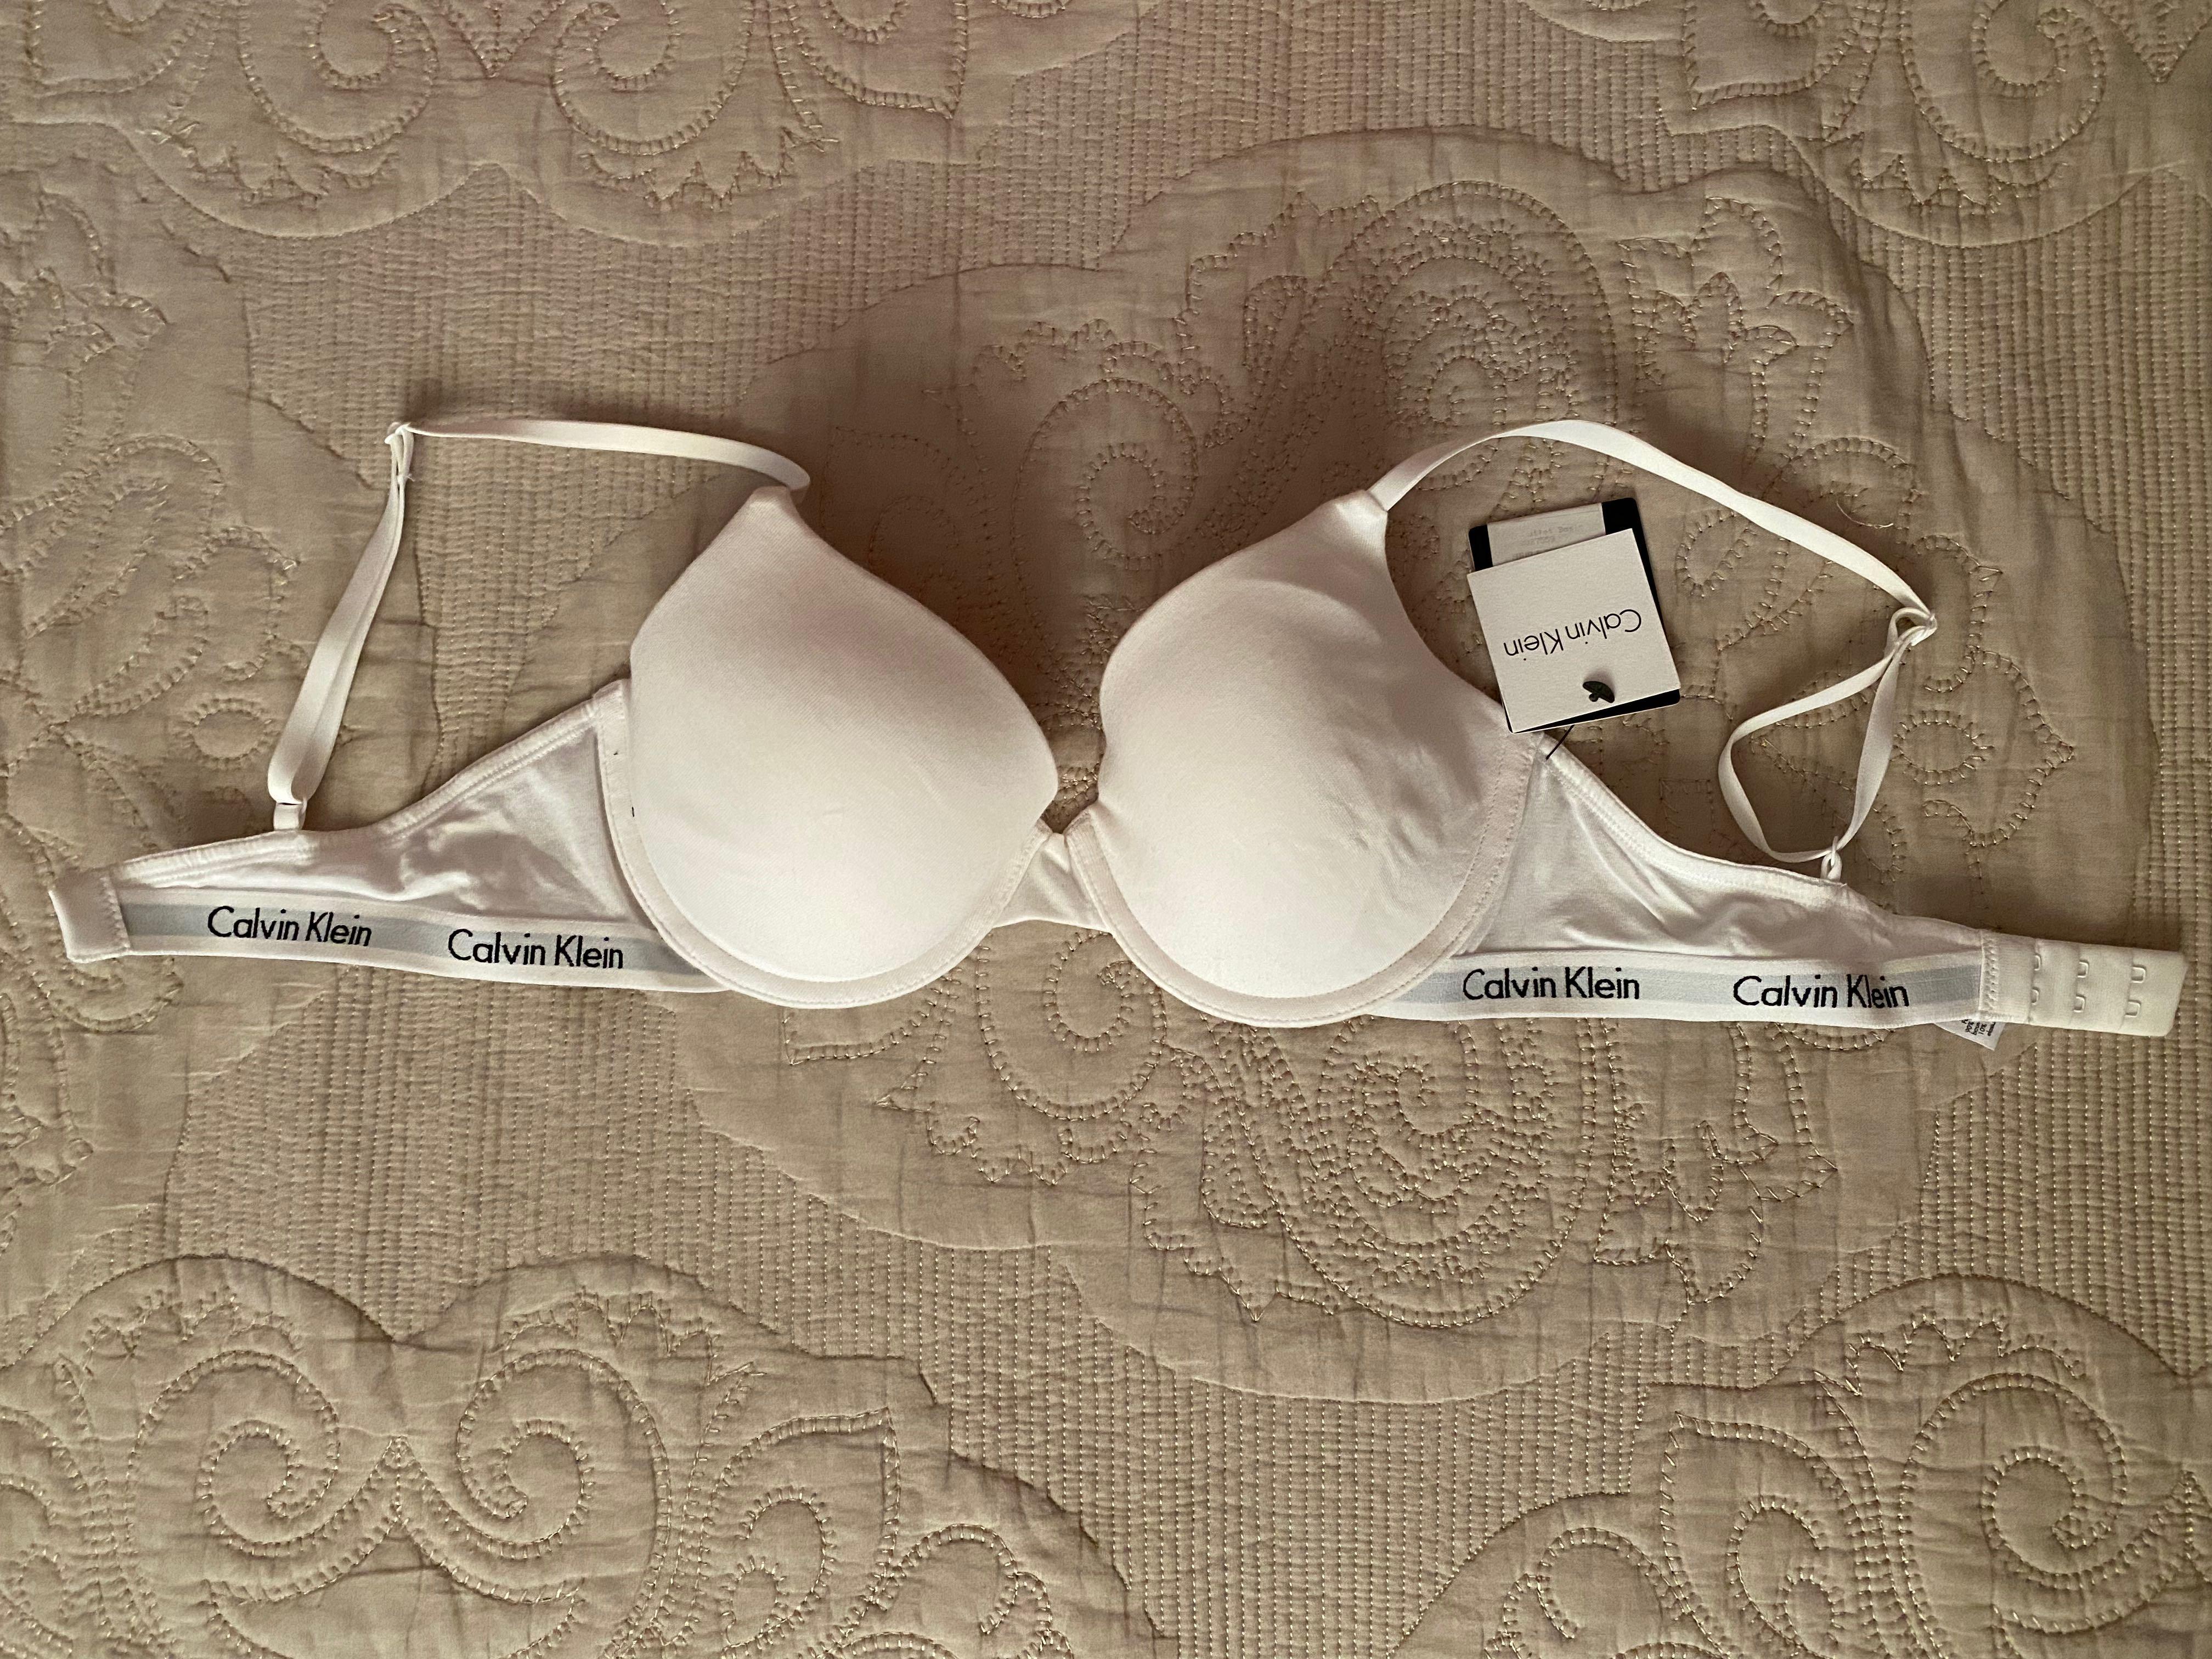 brand new with tag Calvin Klein White Bra (authentic), Women's Fashion, New  Undergarments & Loungewear on Carousell